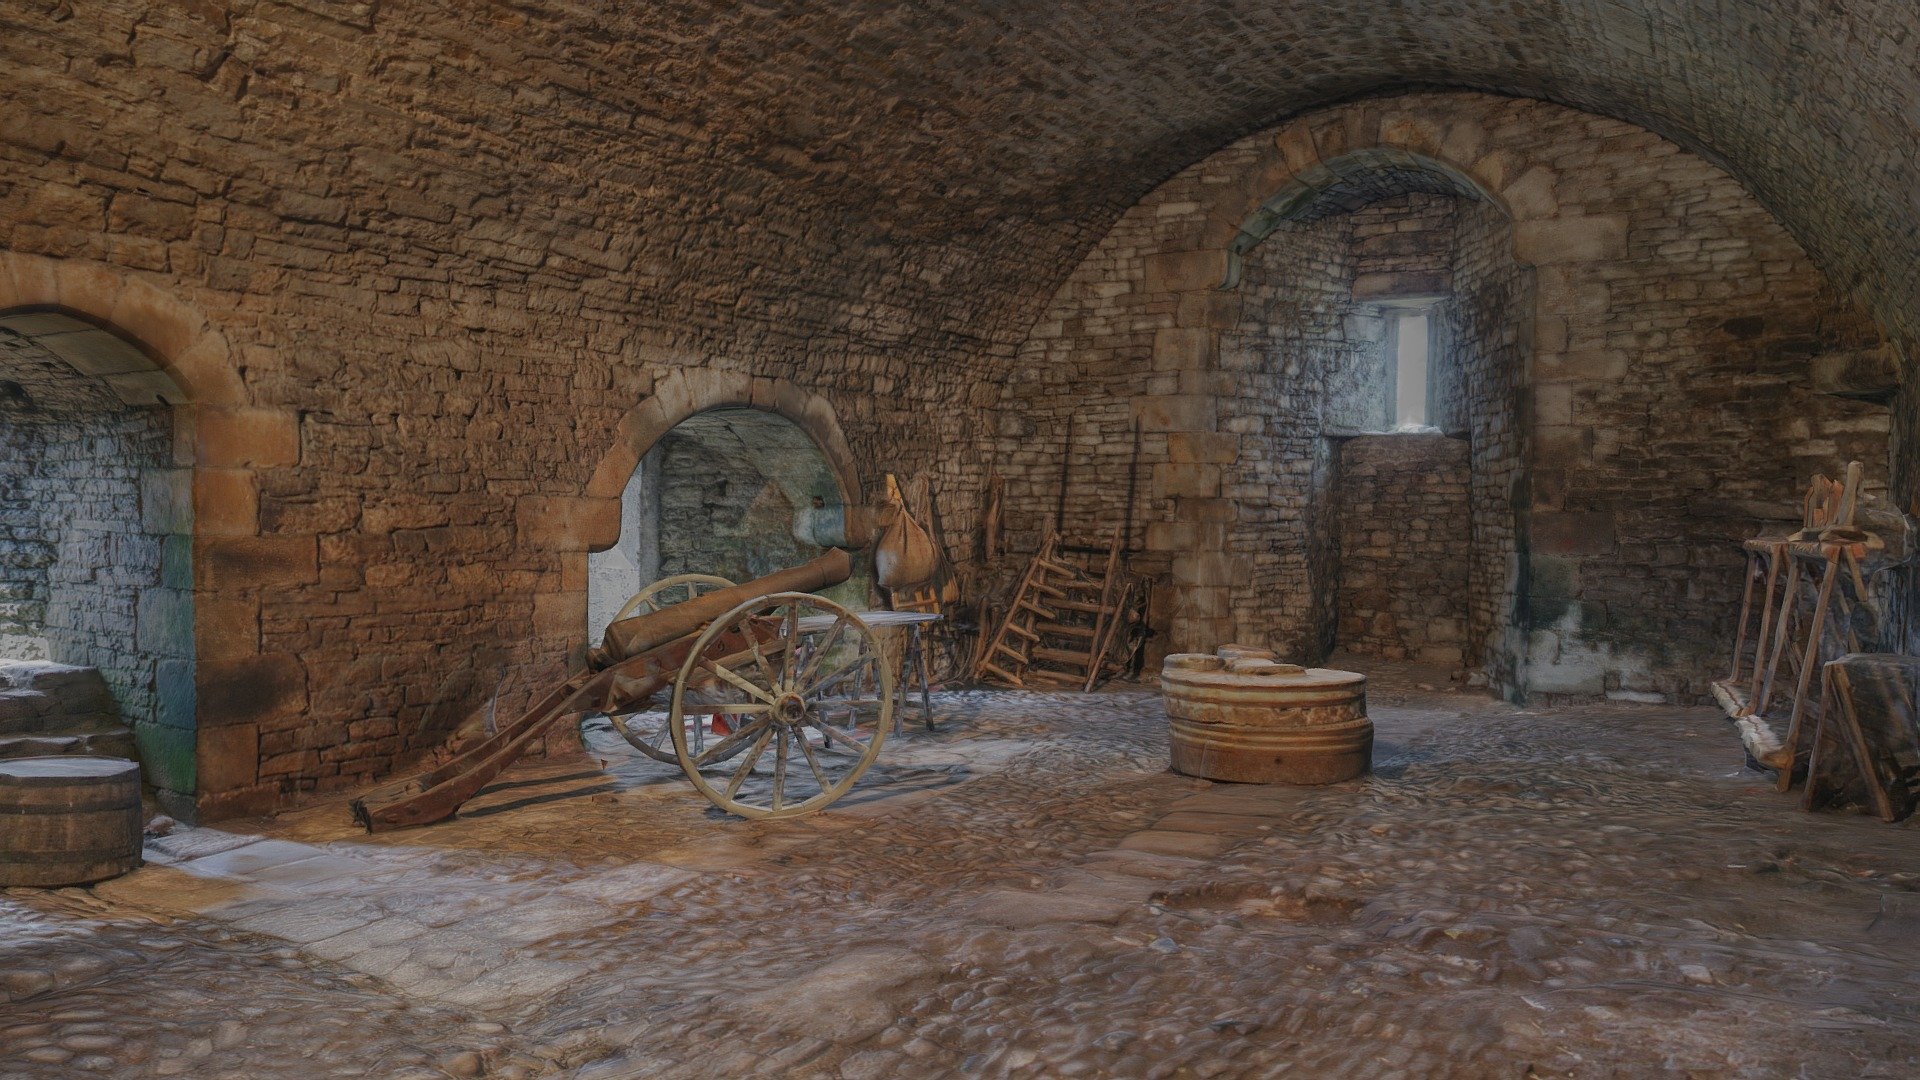 Threshing floor room at Bolton Castle, North Yorkshire, UK

Created from 140 photographs (Canon EOS Rebel T5i).  Some mesh editing and reconstruction (canon wheels and table) in Blender 2.92.  Decimated model from original model of 4.5M faces.  Some issues with ghosting in the textures.  Scaled for VR experience.

Photographed in July 2018 3d model